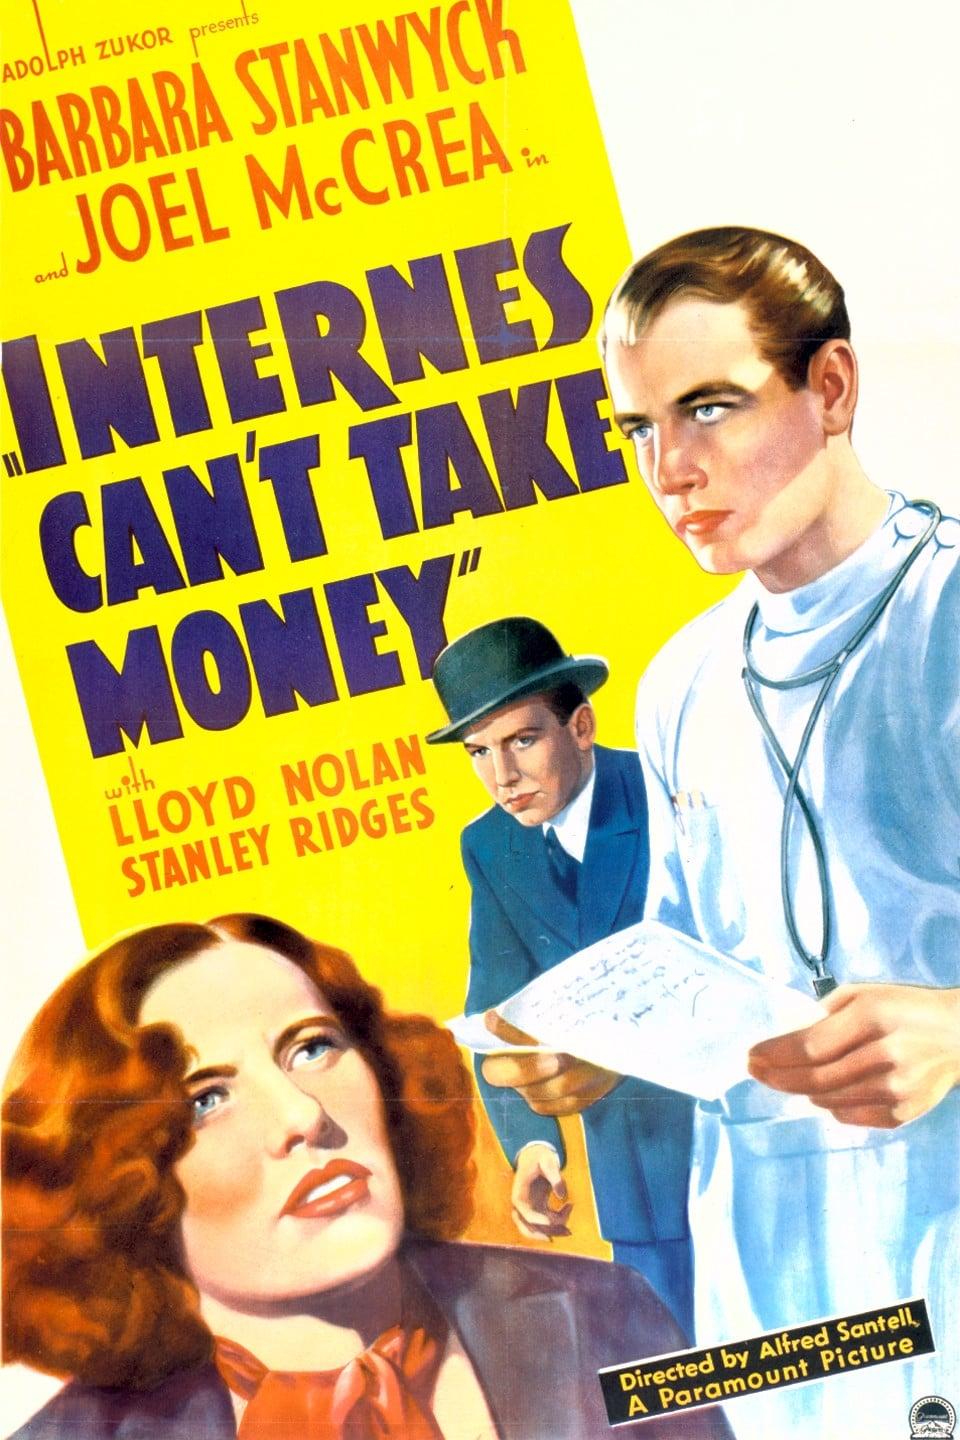 Internes Can't Take Money poster